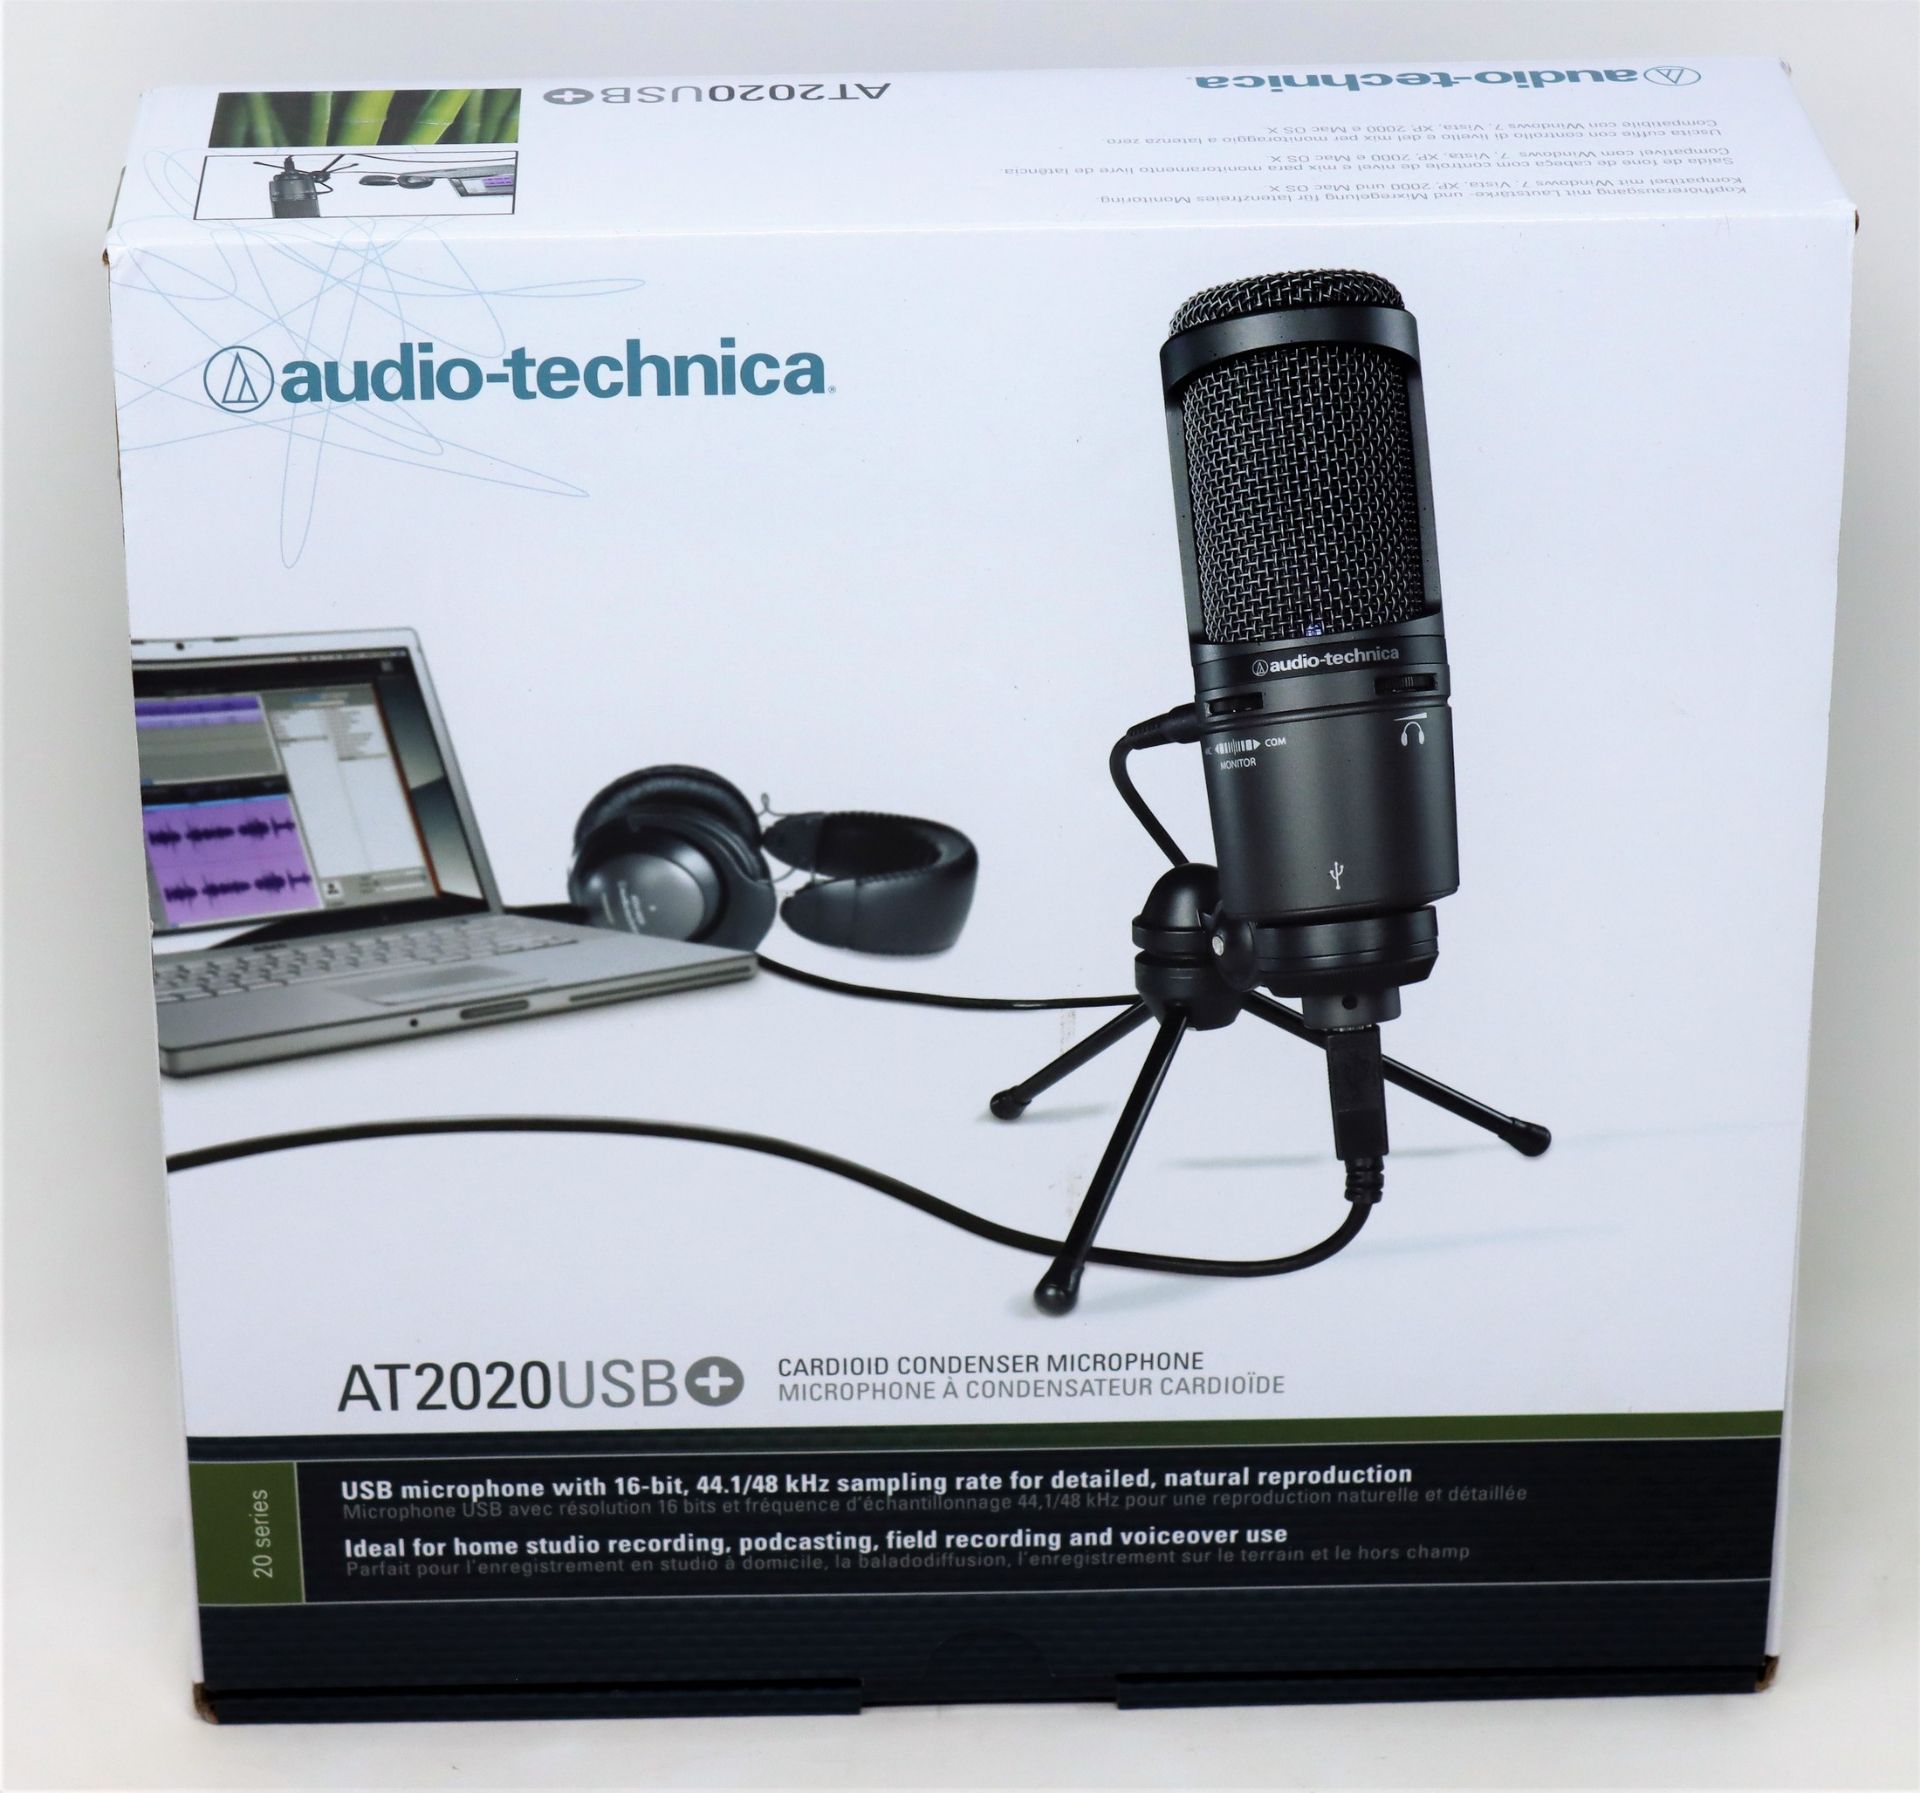 A boxed as new Audio-Technica AT2020USB+ USB Cardioid Condenser Microphone (Box opened).